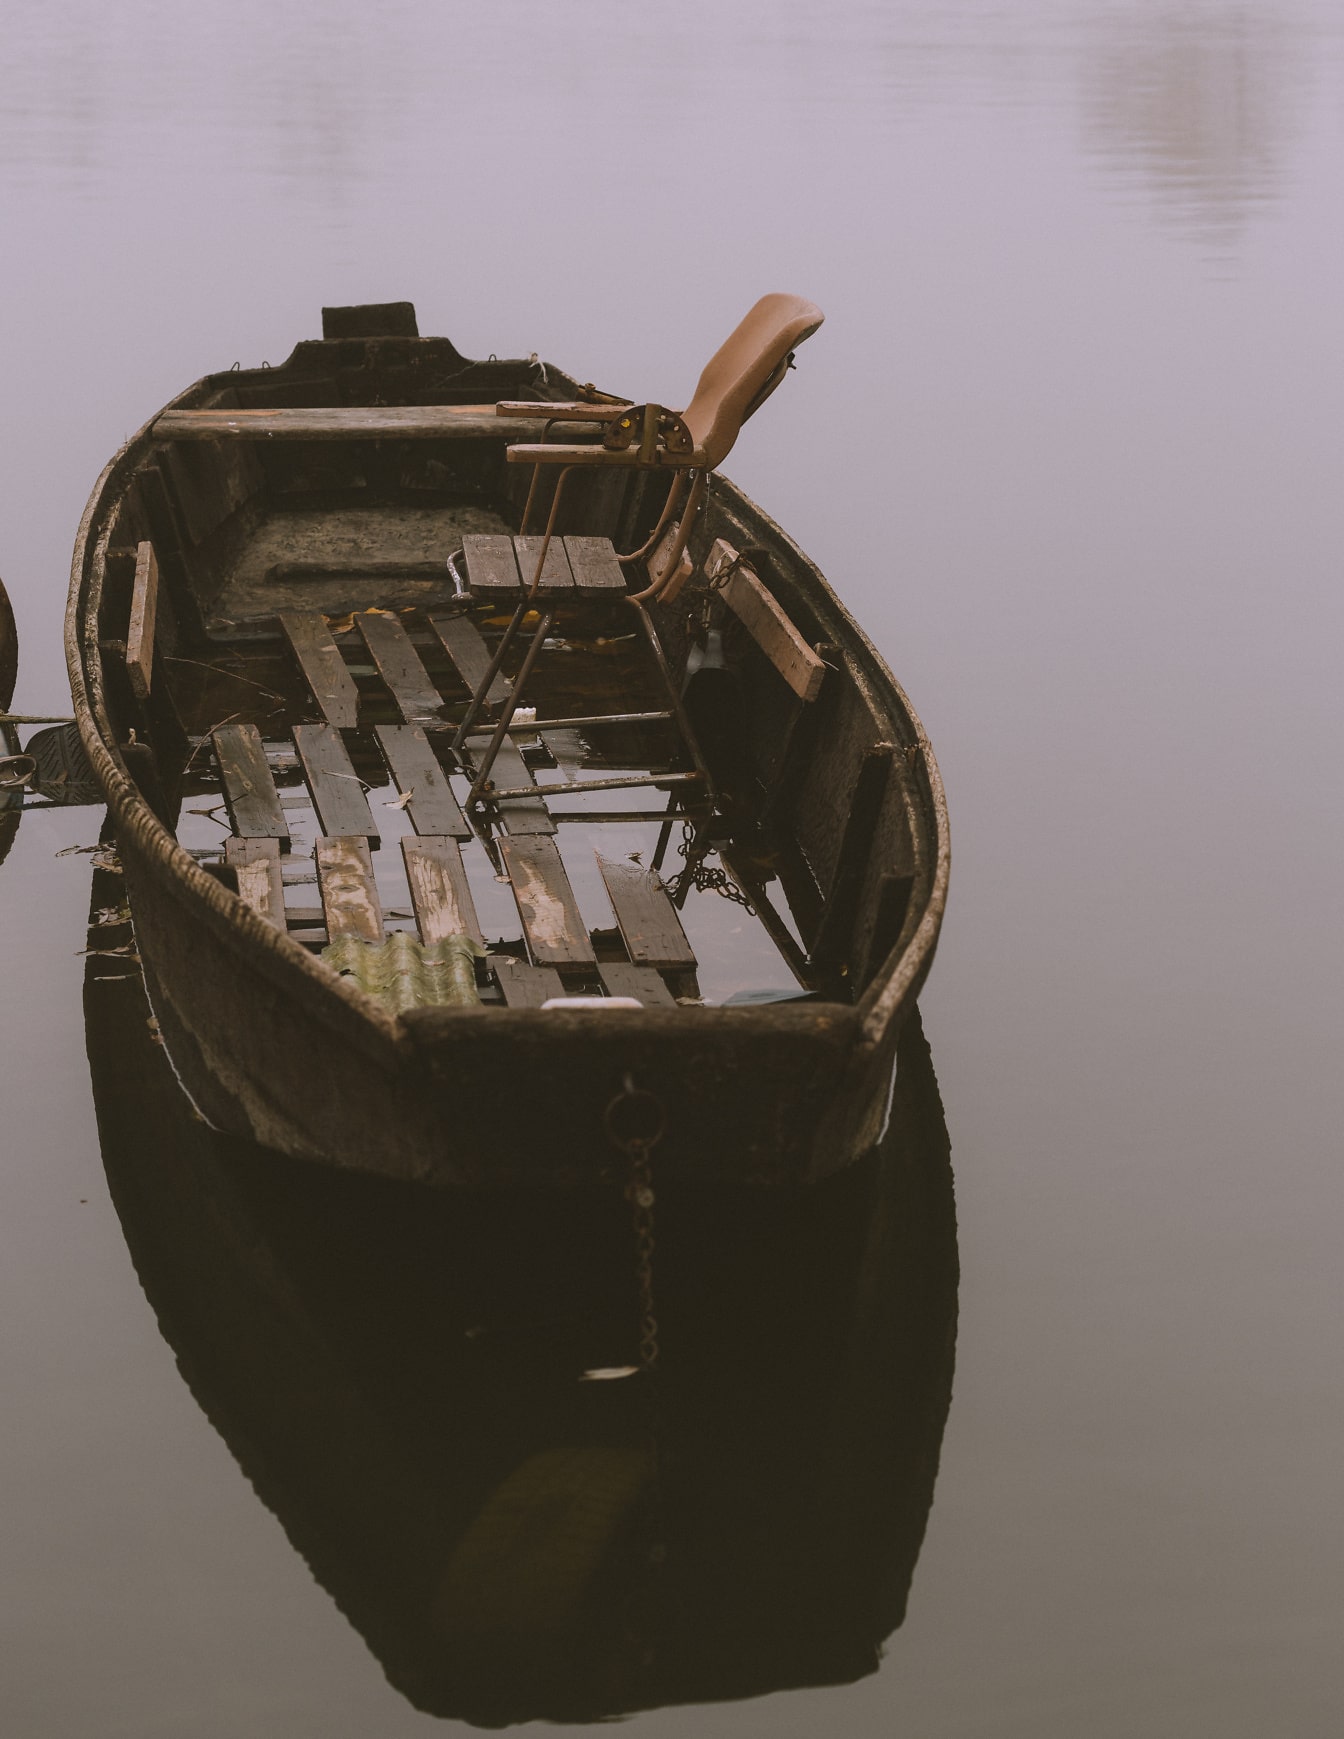 Old wooden boat on the water with chair in it